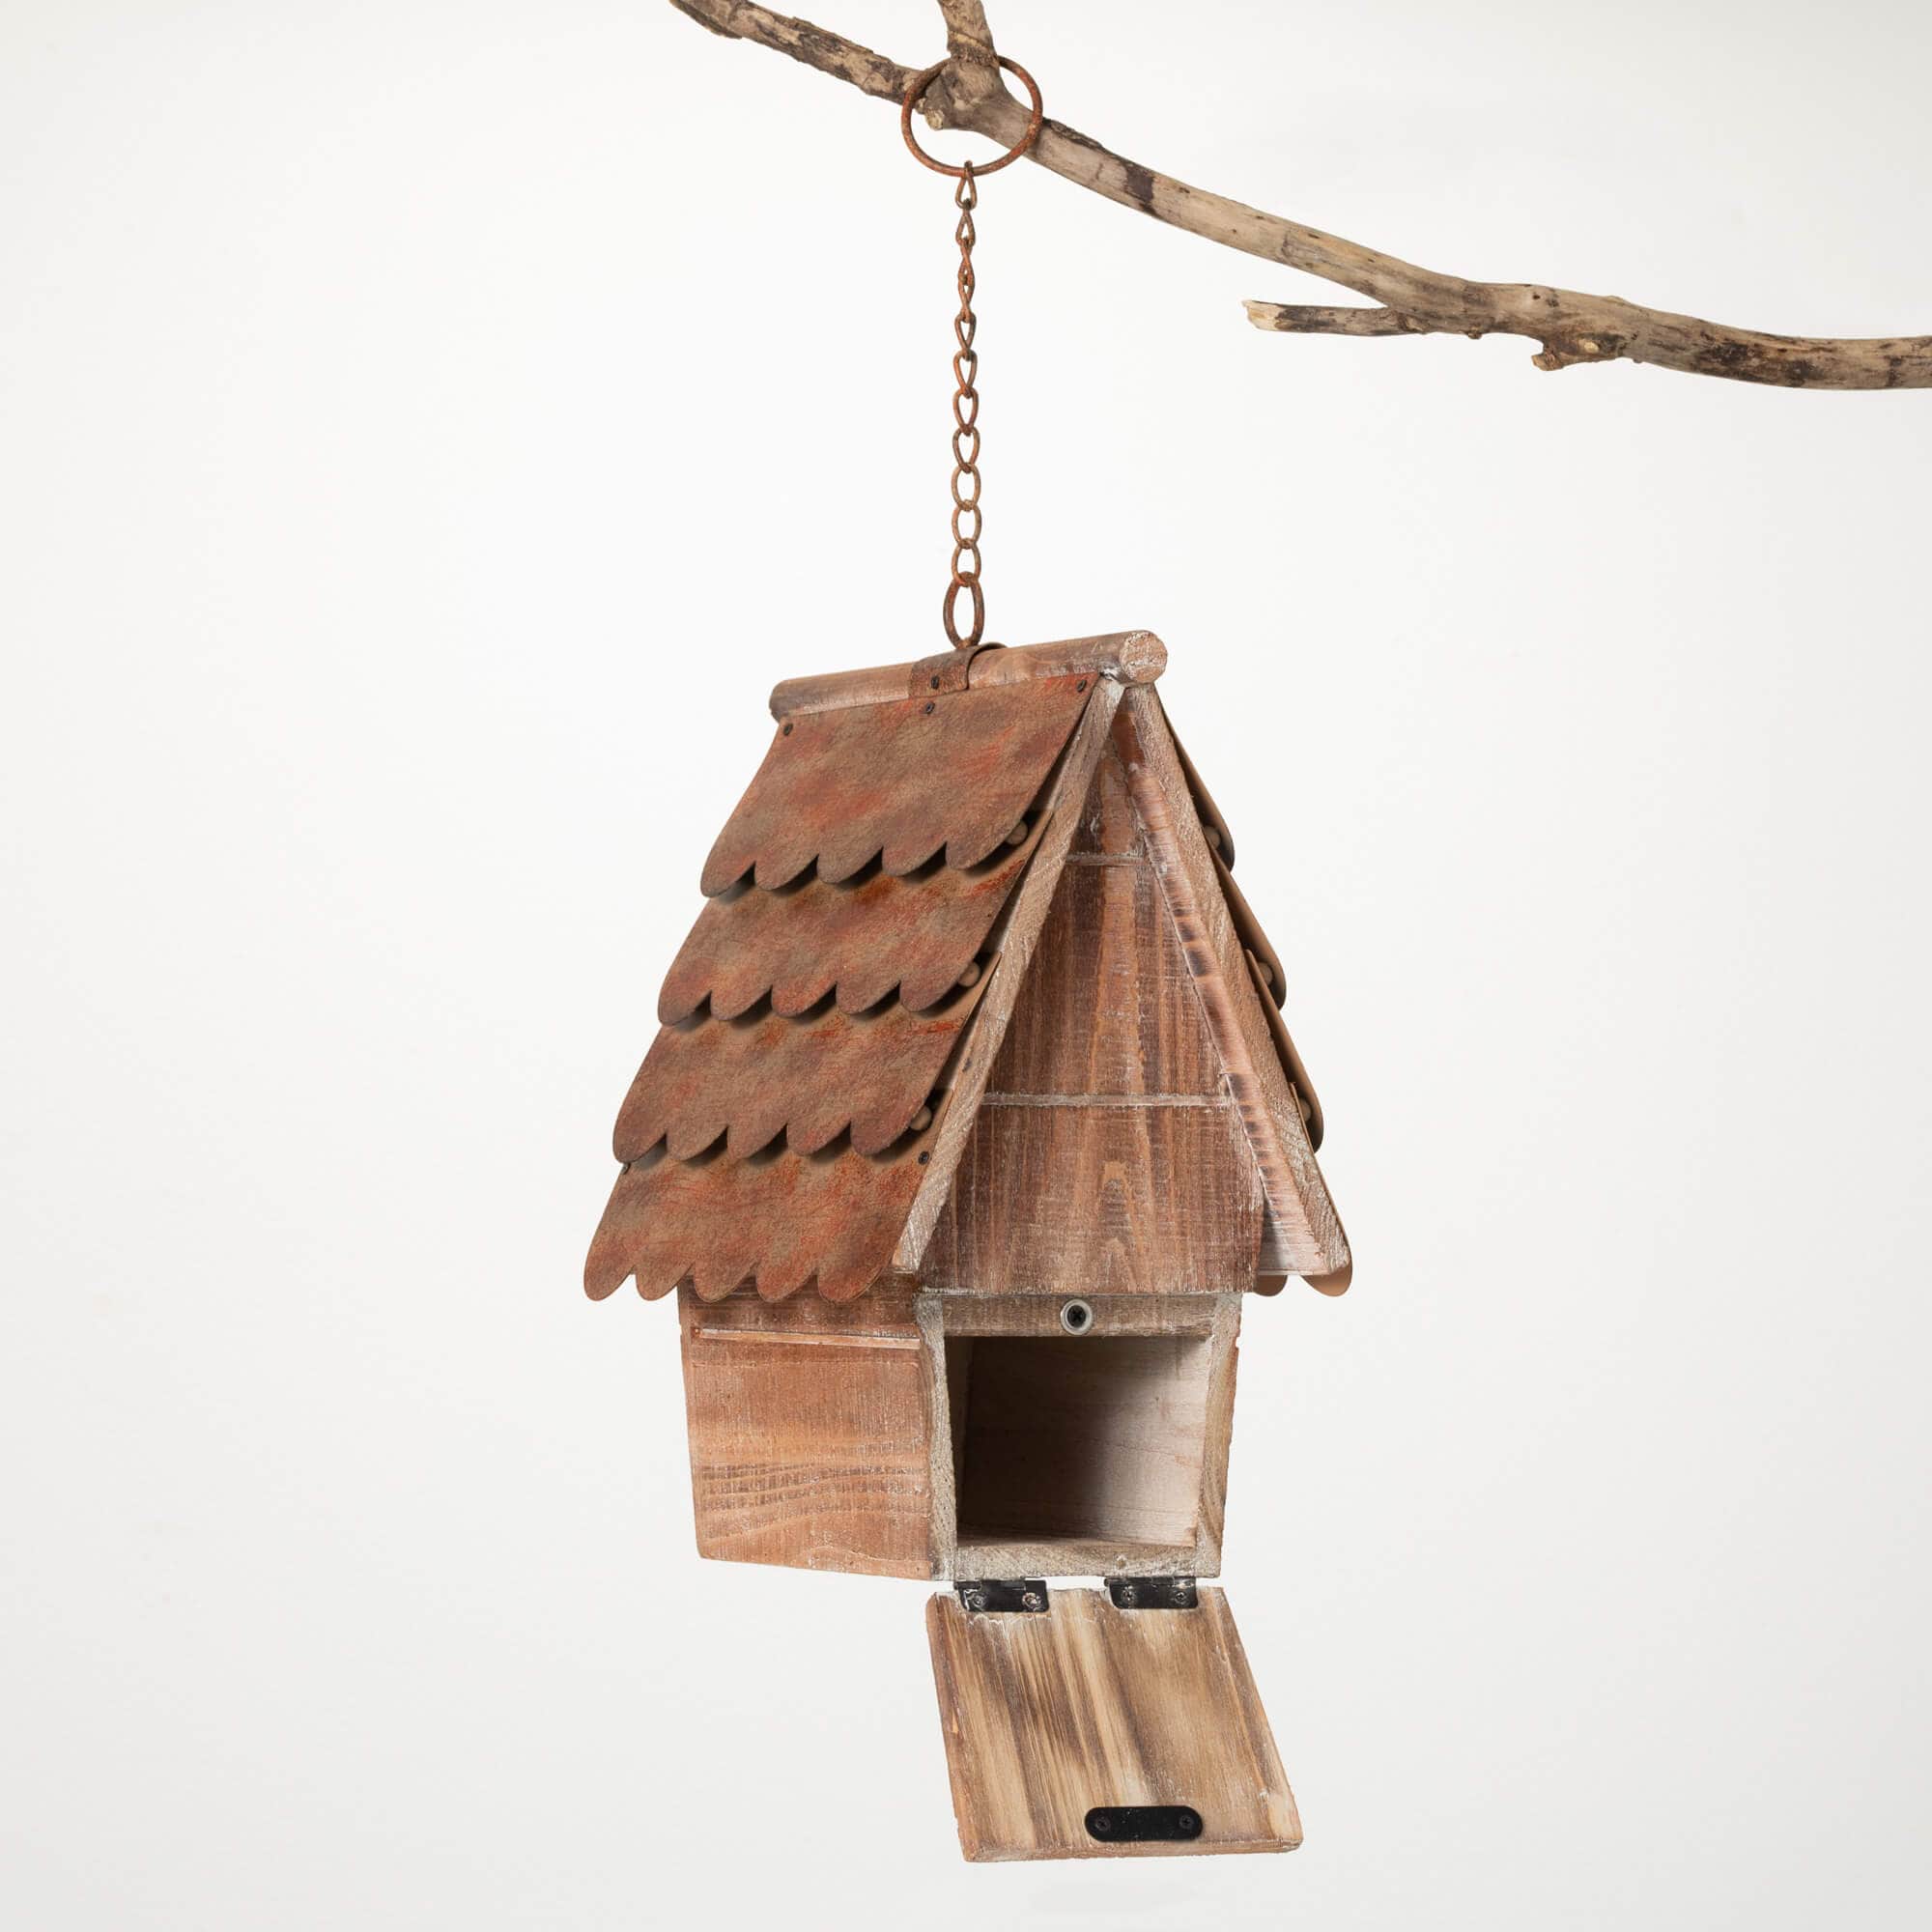 Birdhouse With Copper Roof by Elevate Home Decor - Outdoors